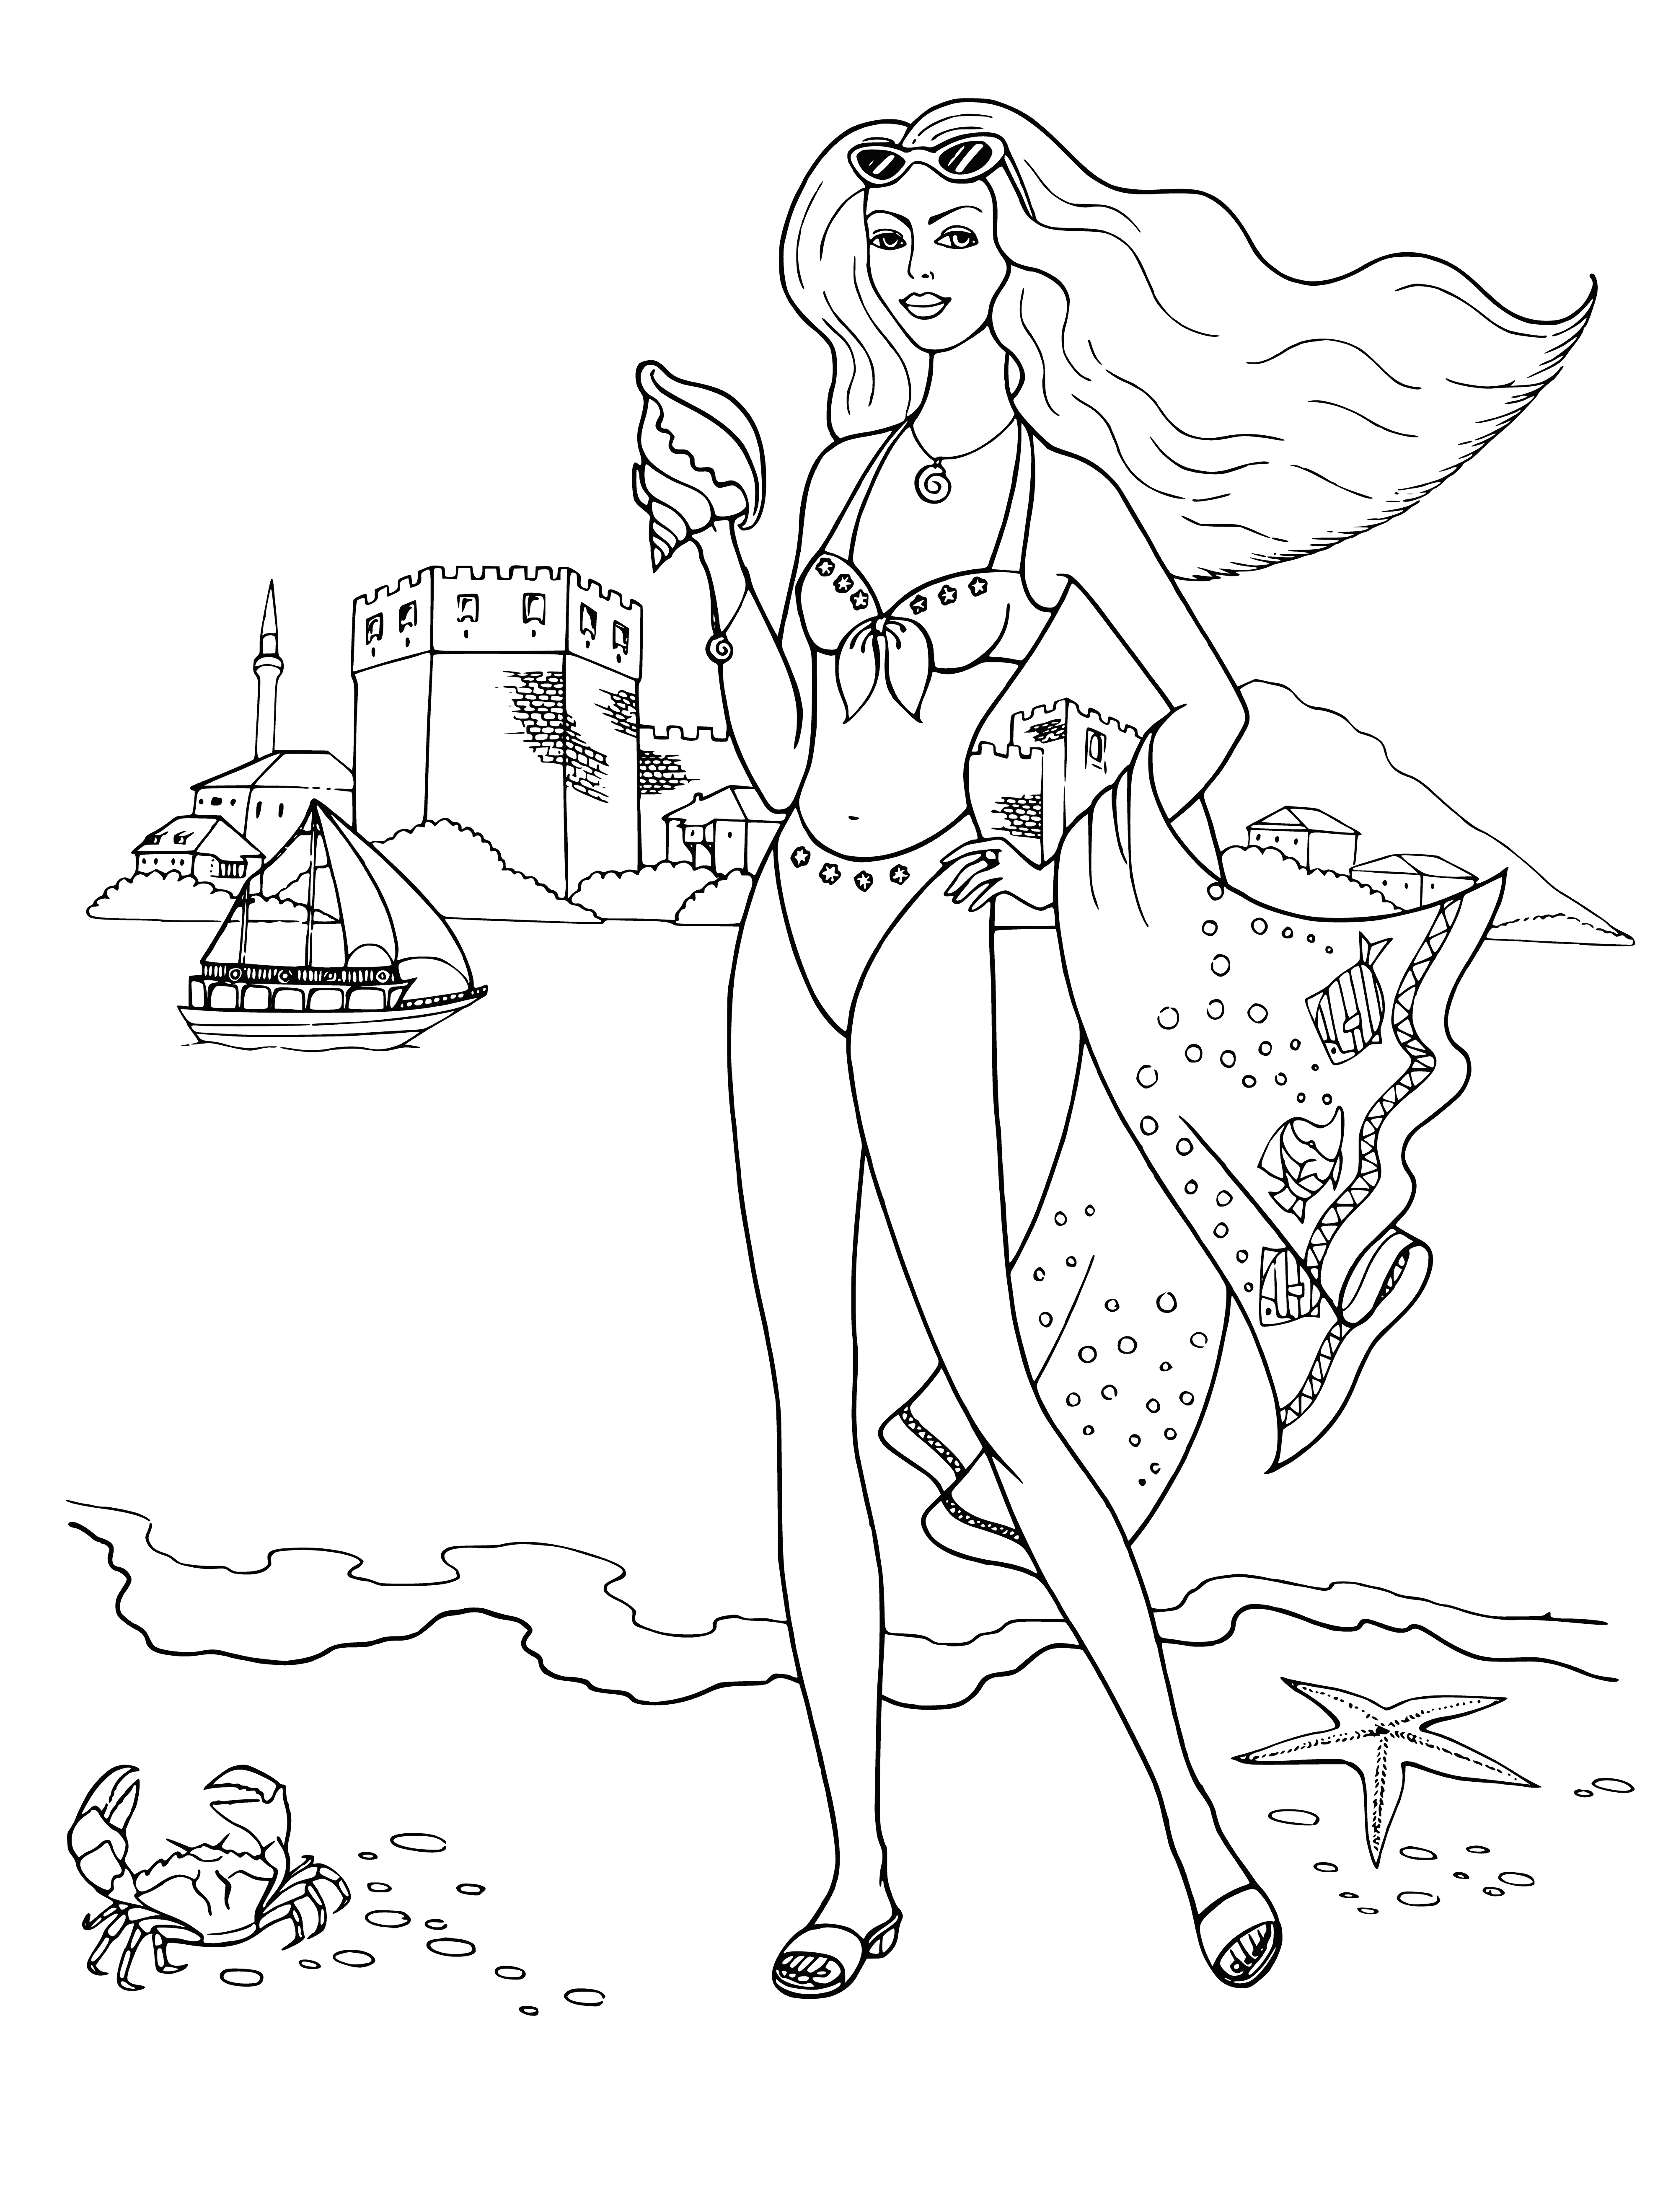 coloring page: Group of fashionable women on beach wearing bikinis & hairstyles, each has different color and carrying trendy beach bags.